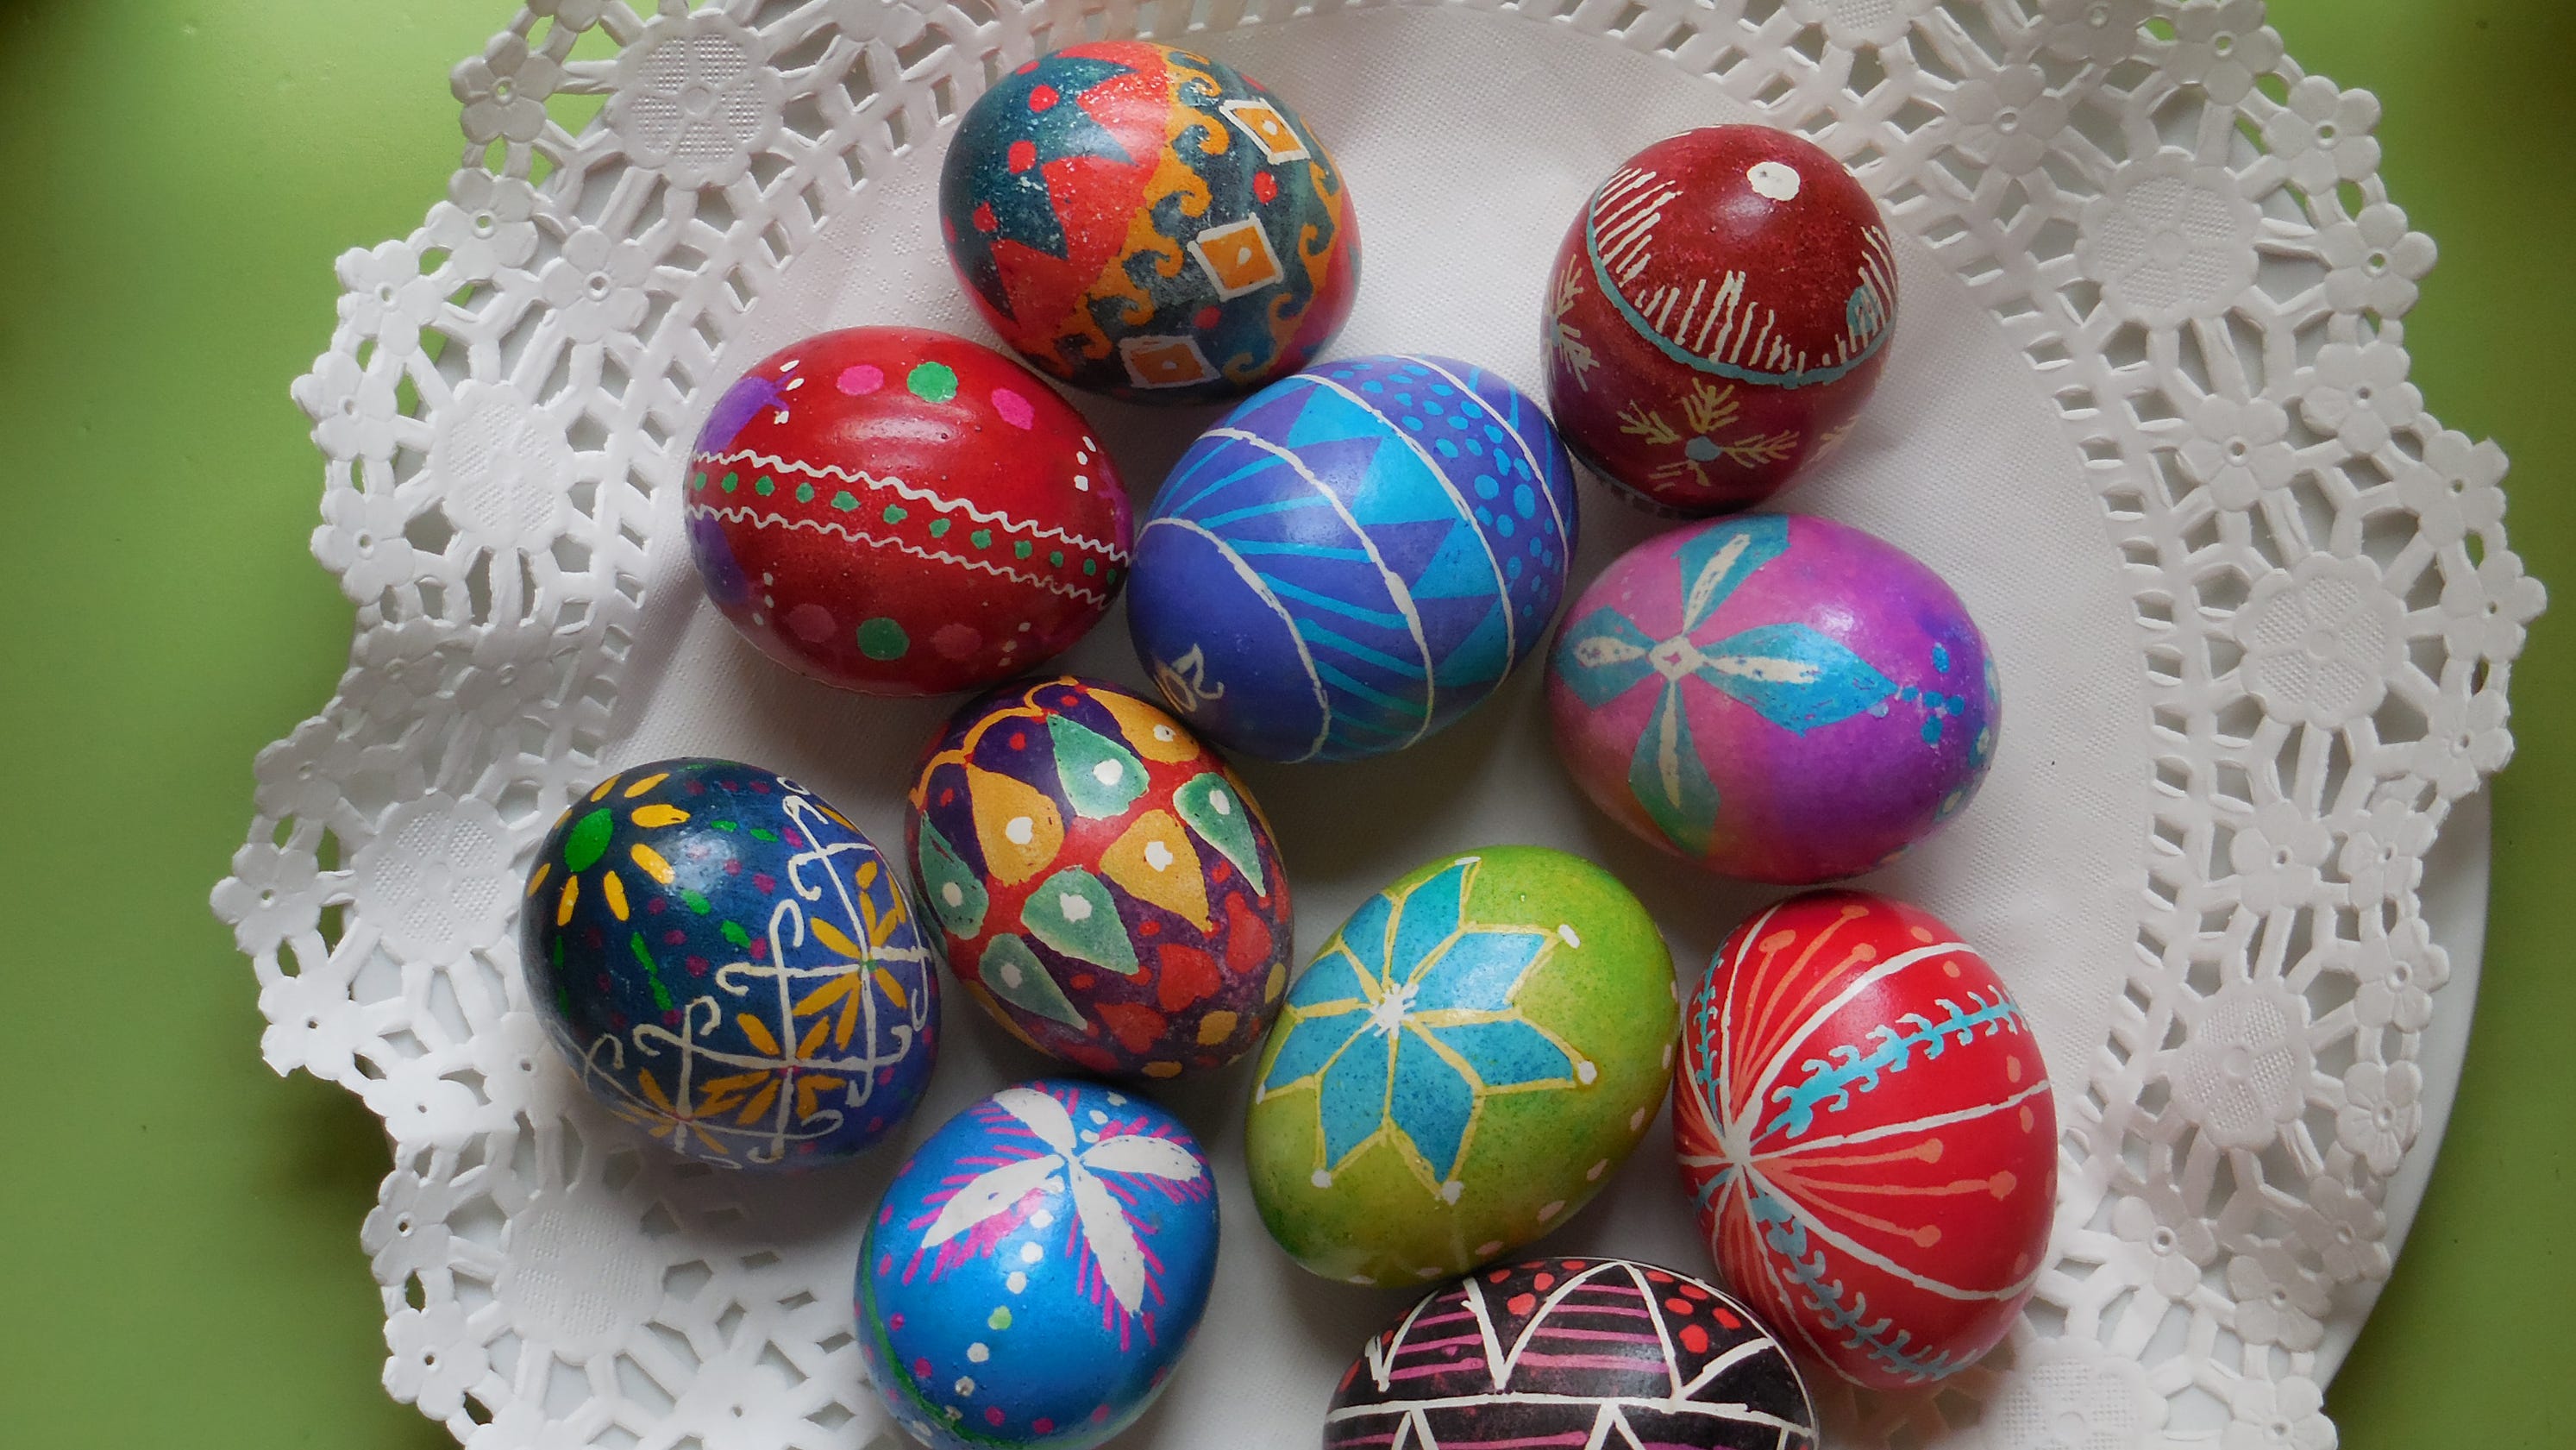 This Spring Learn “Pysanky”, The Art Of Ukrainian Egg Decorating